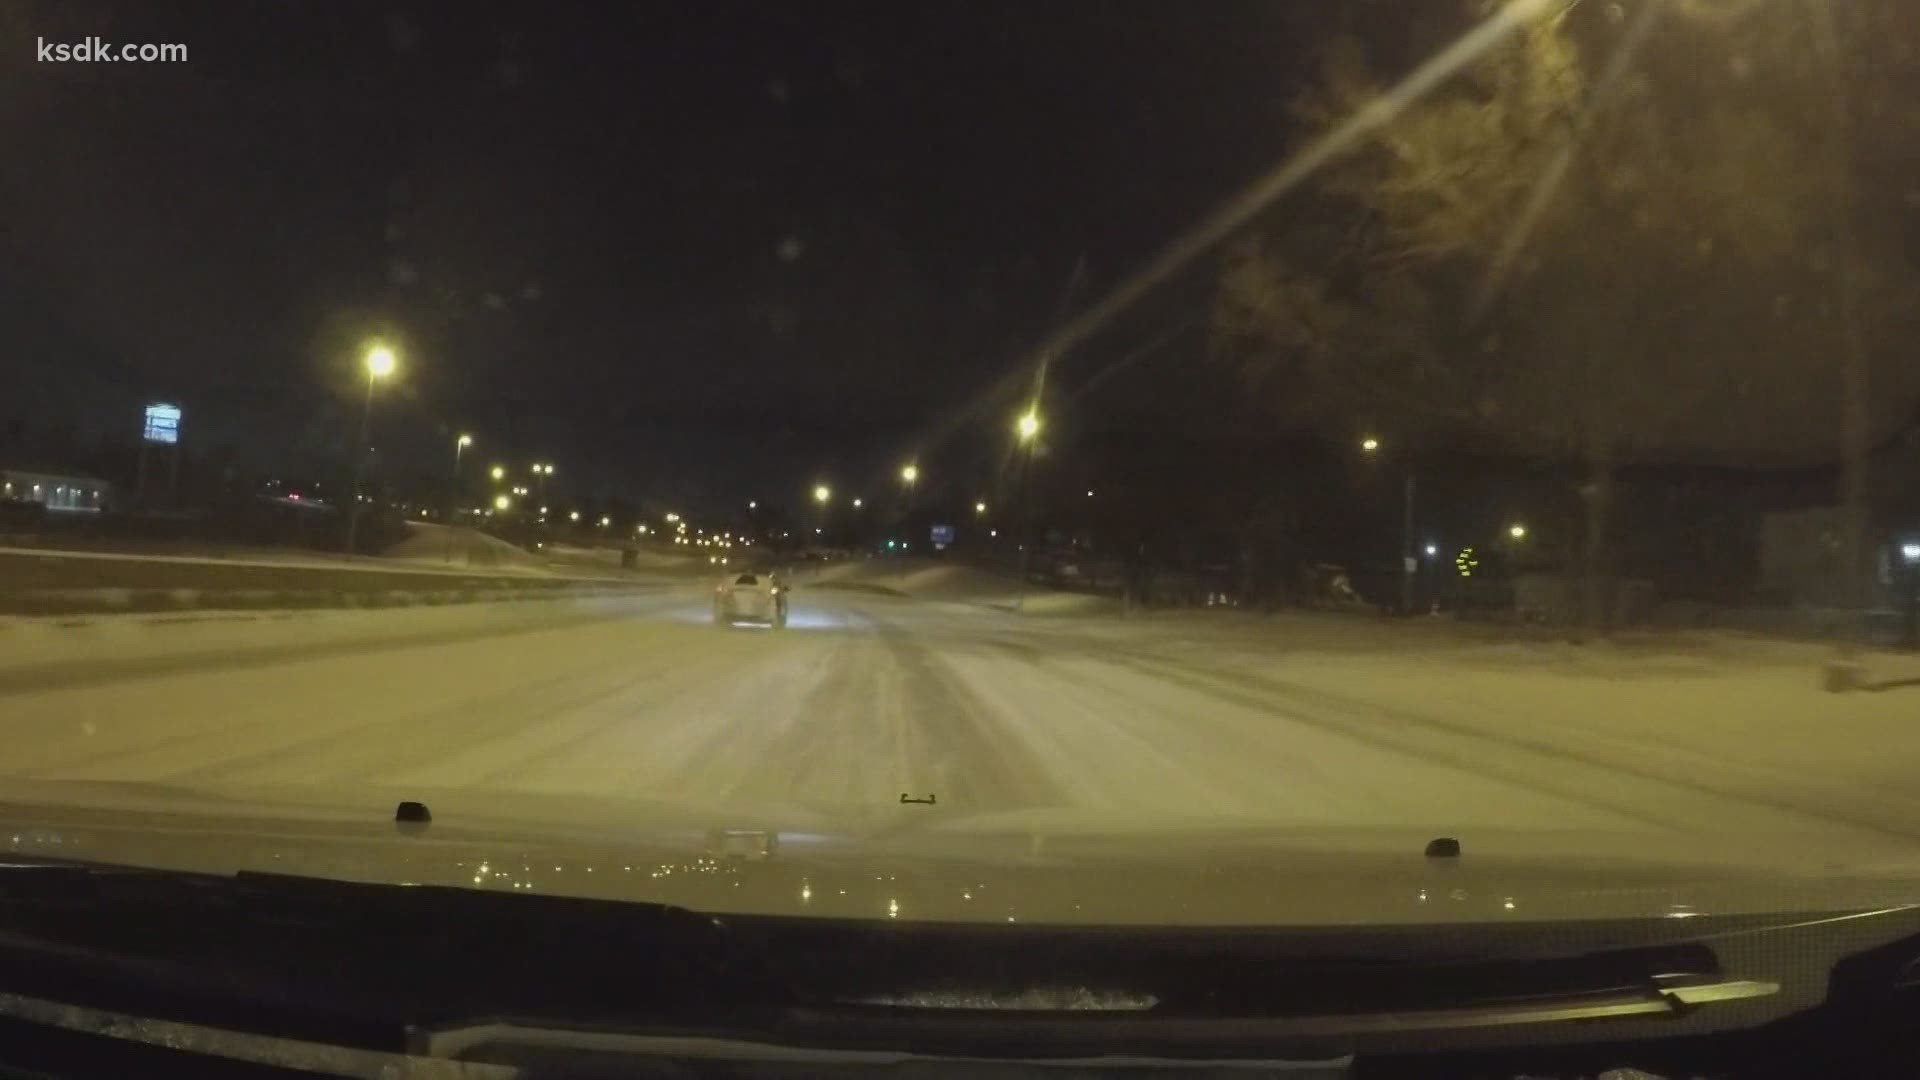 IDOT said high winds and snow made it difficult to clear the roads